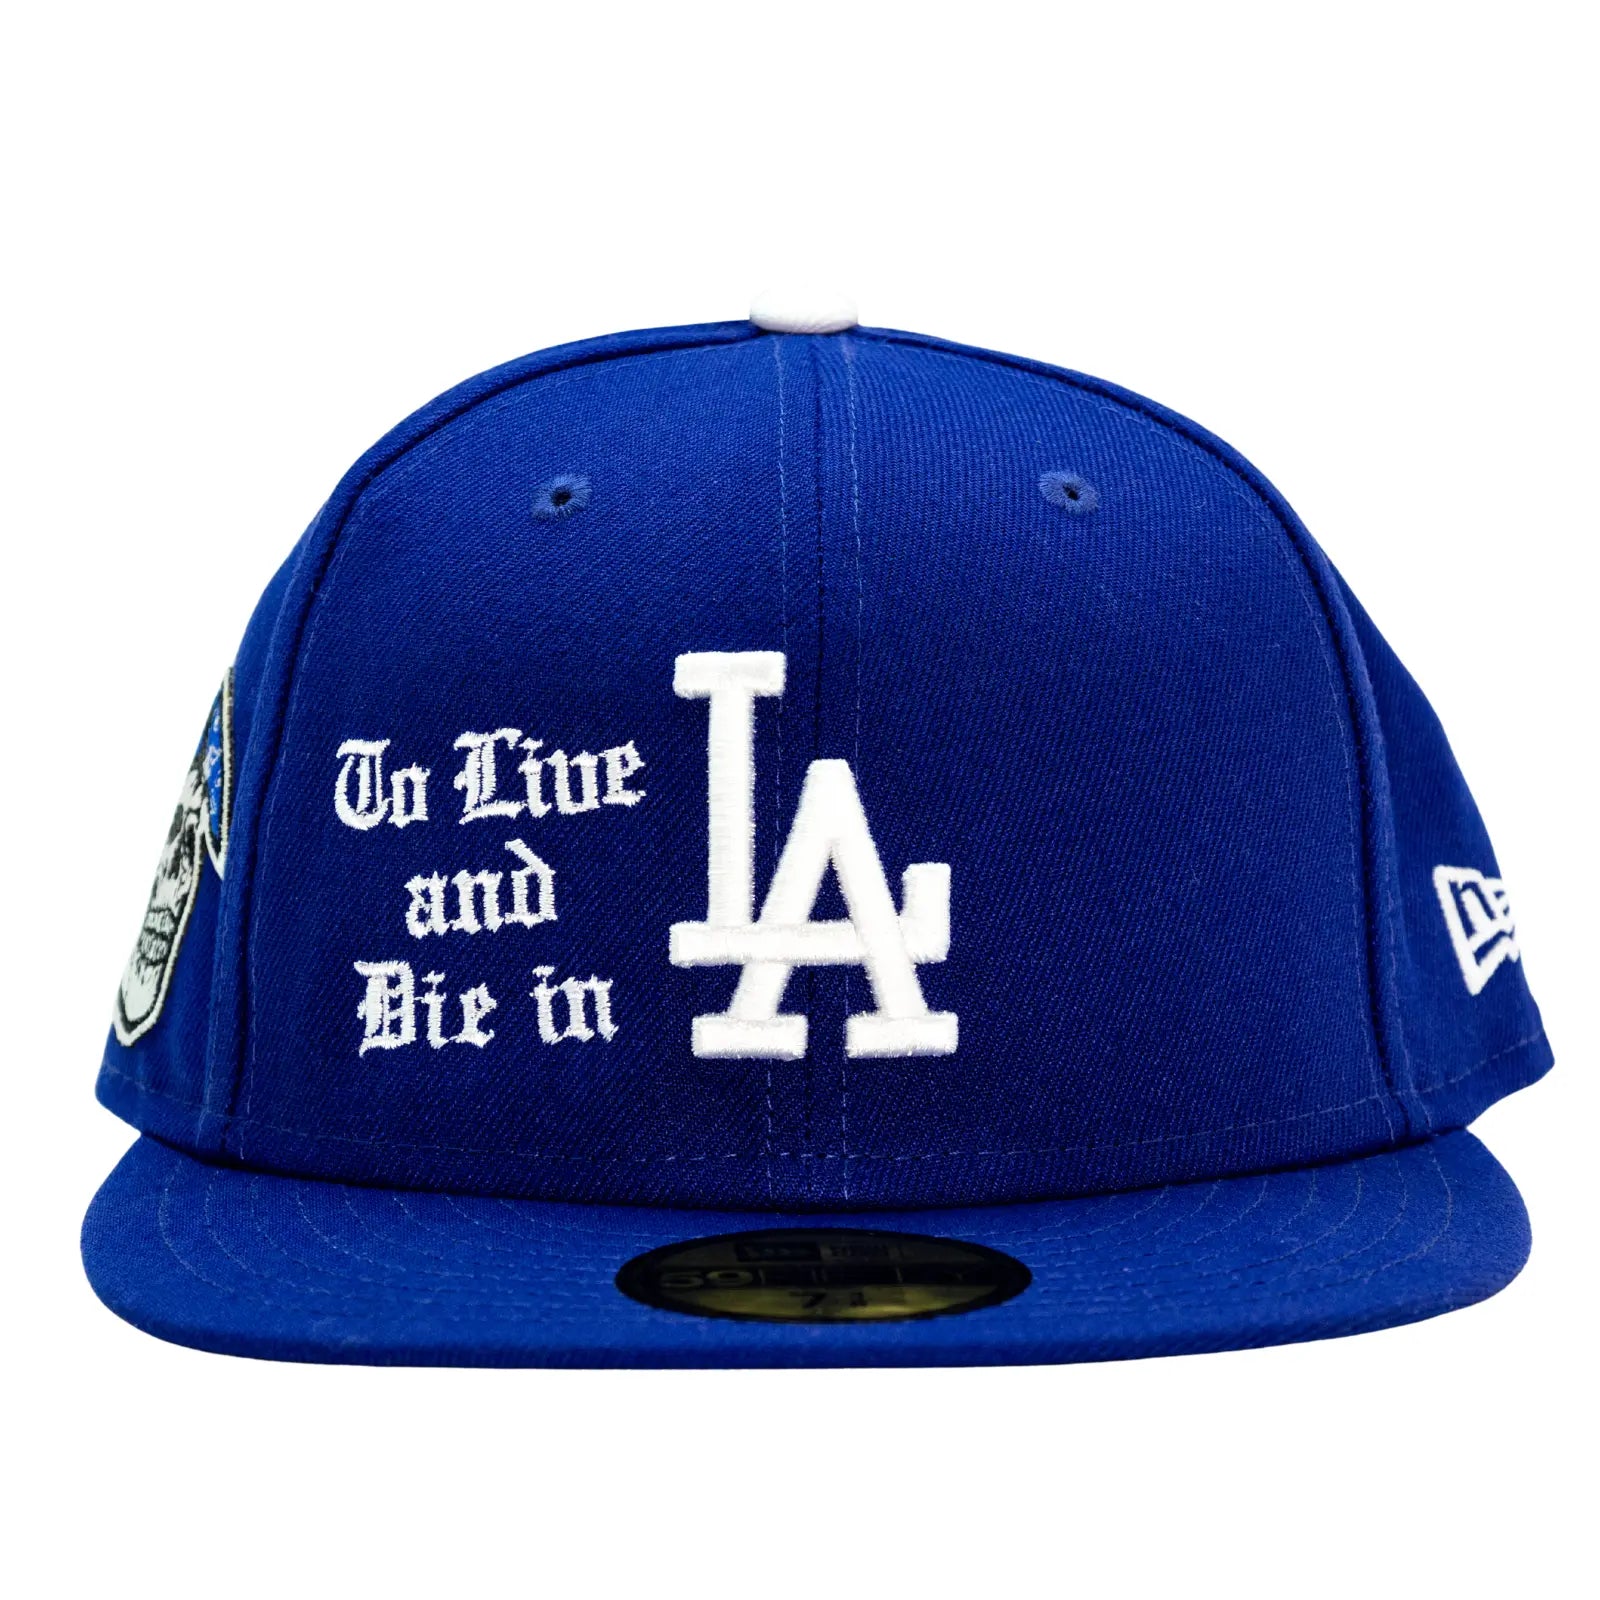 los angeles dodgers fitted hat with patch